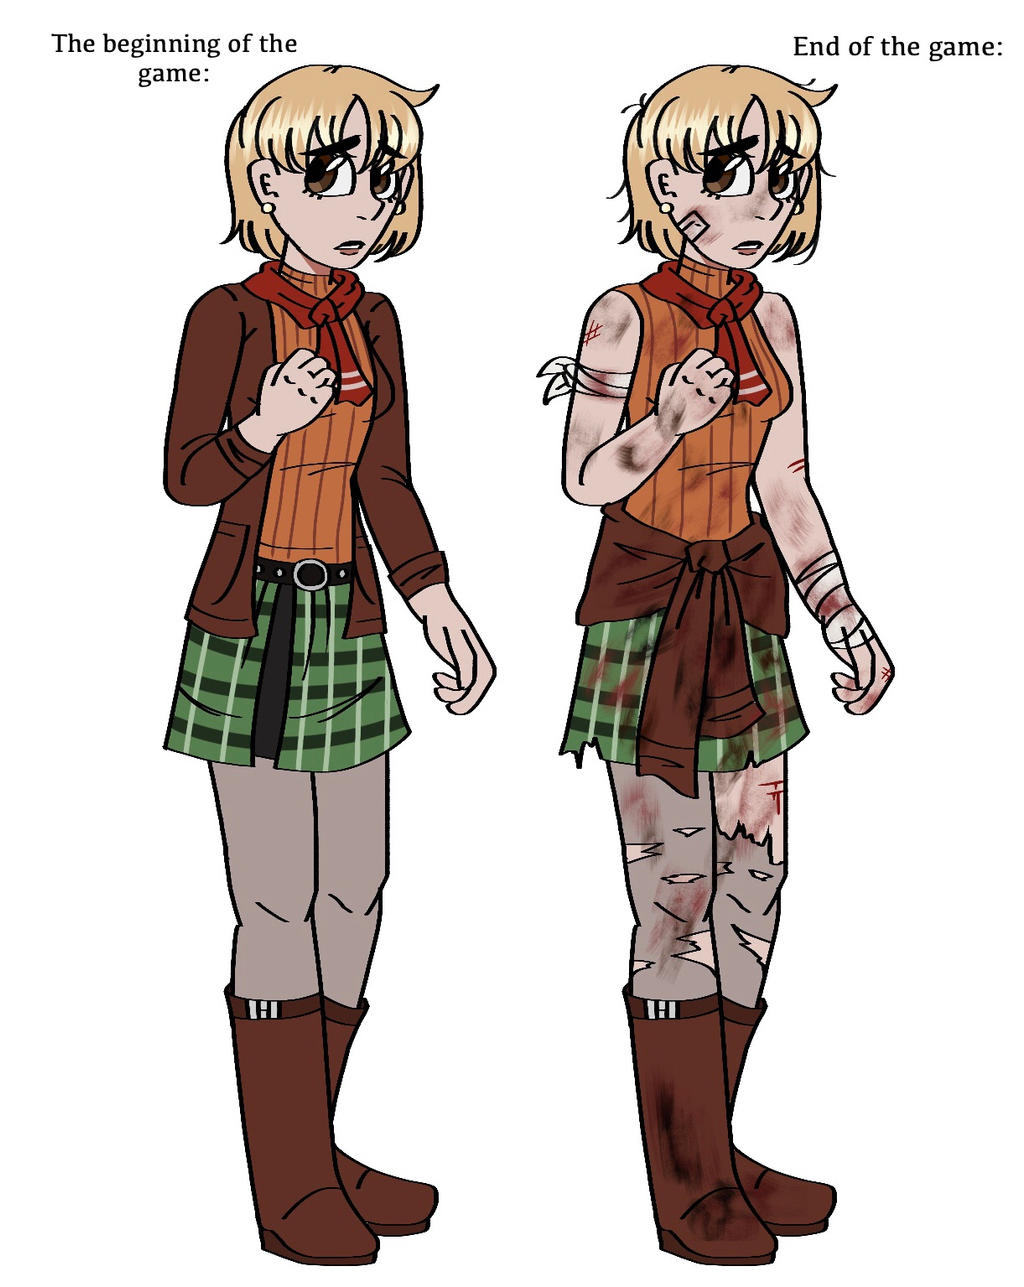 art blog — the way ashley's section was done in the remake is